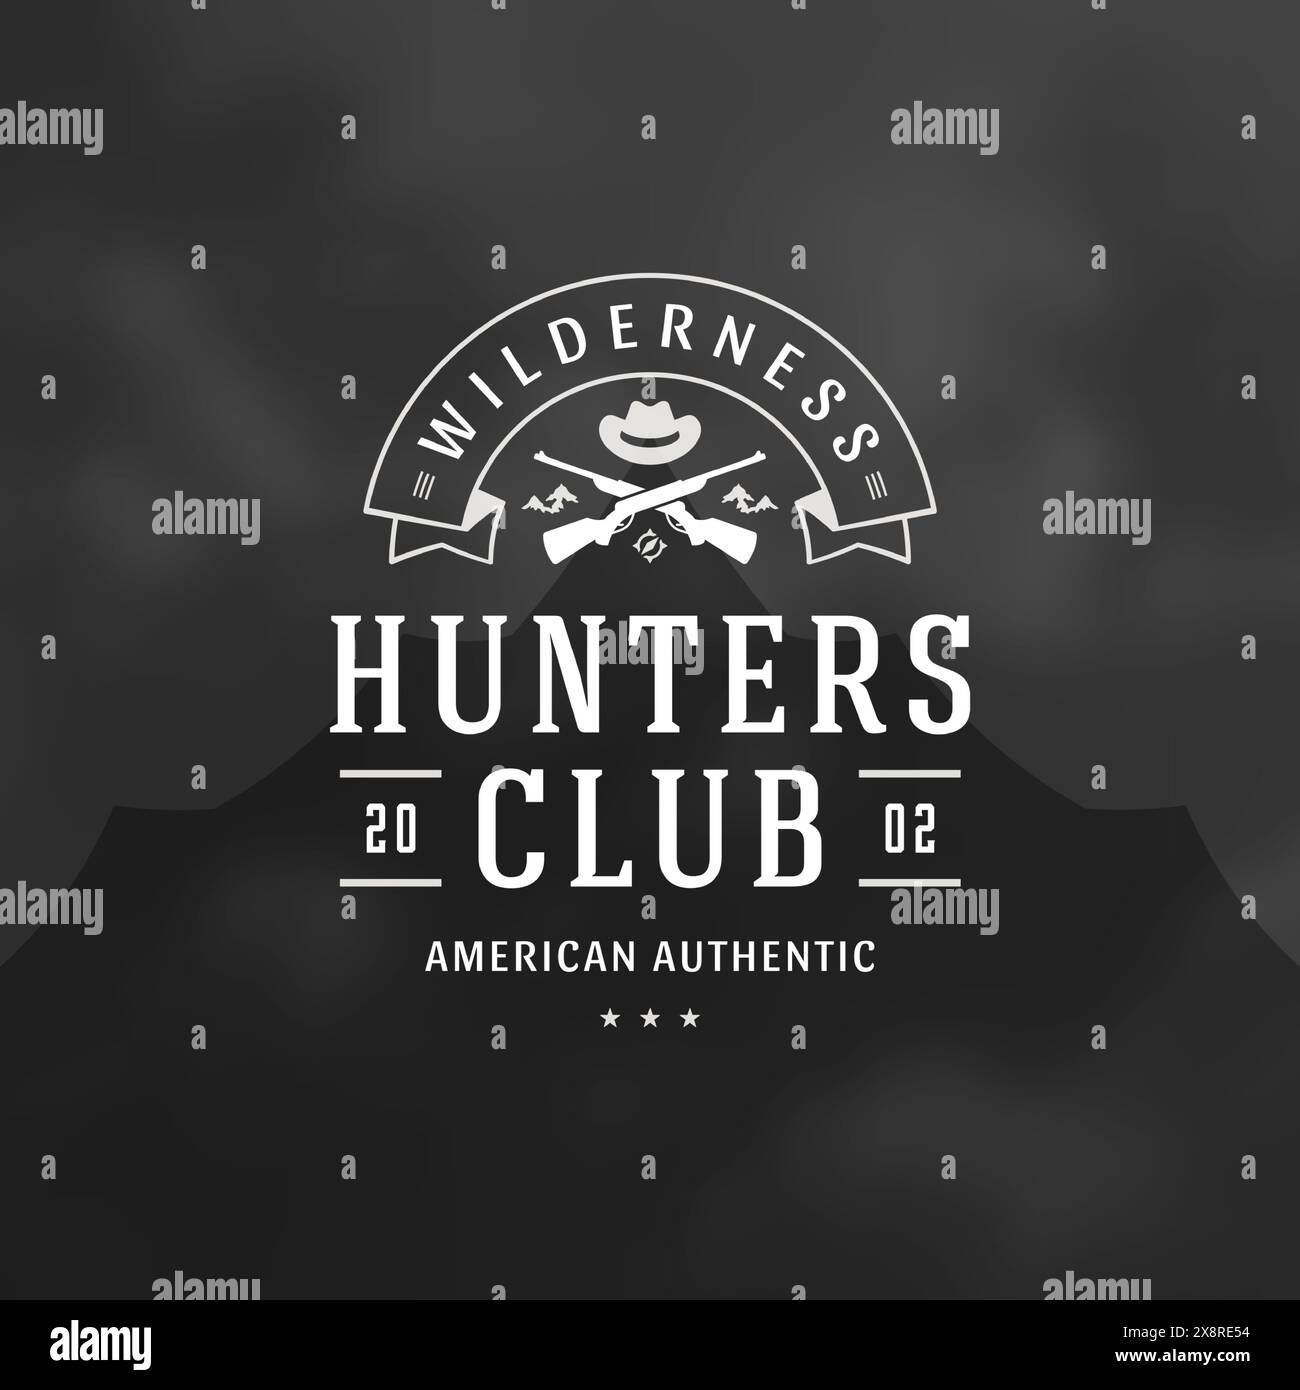 Hunters club logo emblem vector illustration. Outdoor adventure leisure, Rifles and hat silhouettes shirt, print stamp. Vintage typography badge desig Stock Vector